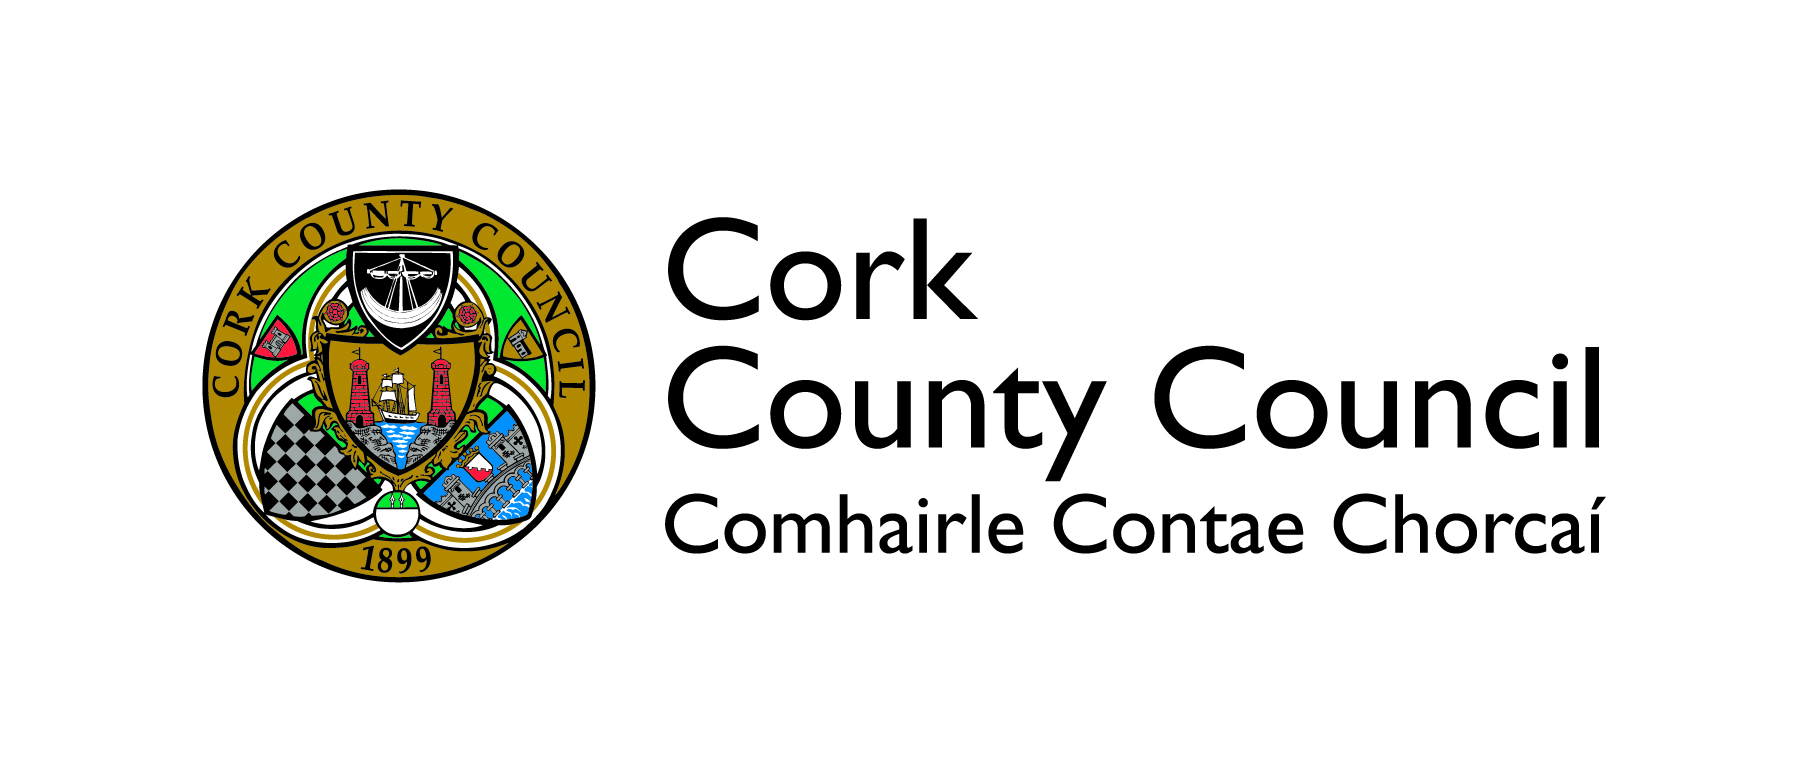 Cork County Council seeks Electricians, Plumber and Building Contractors in Order to Upgrade its Social Housing Stock